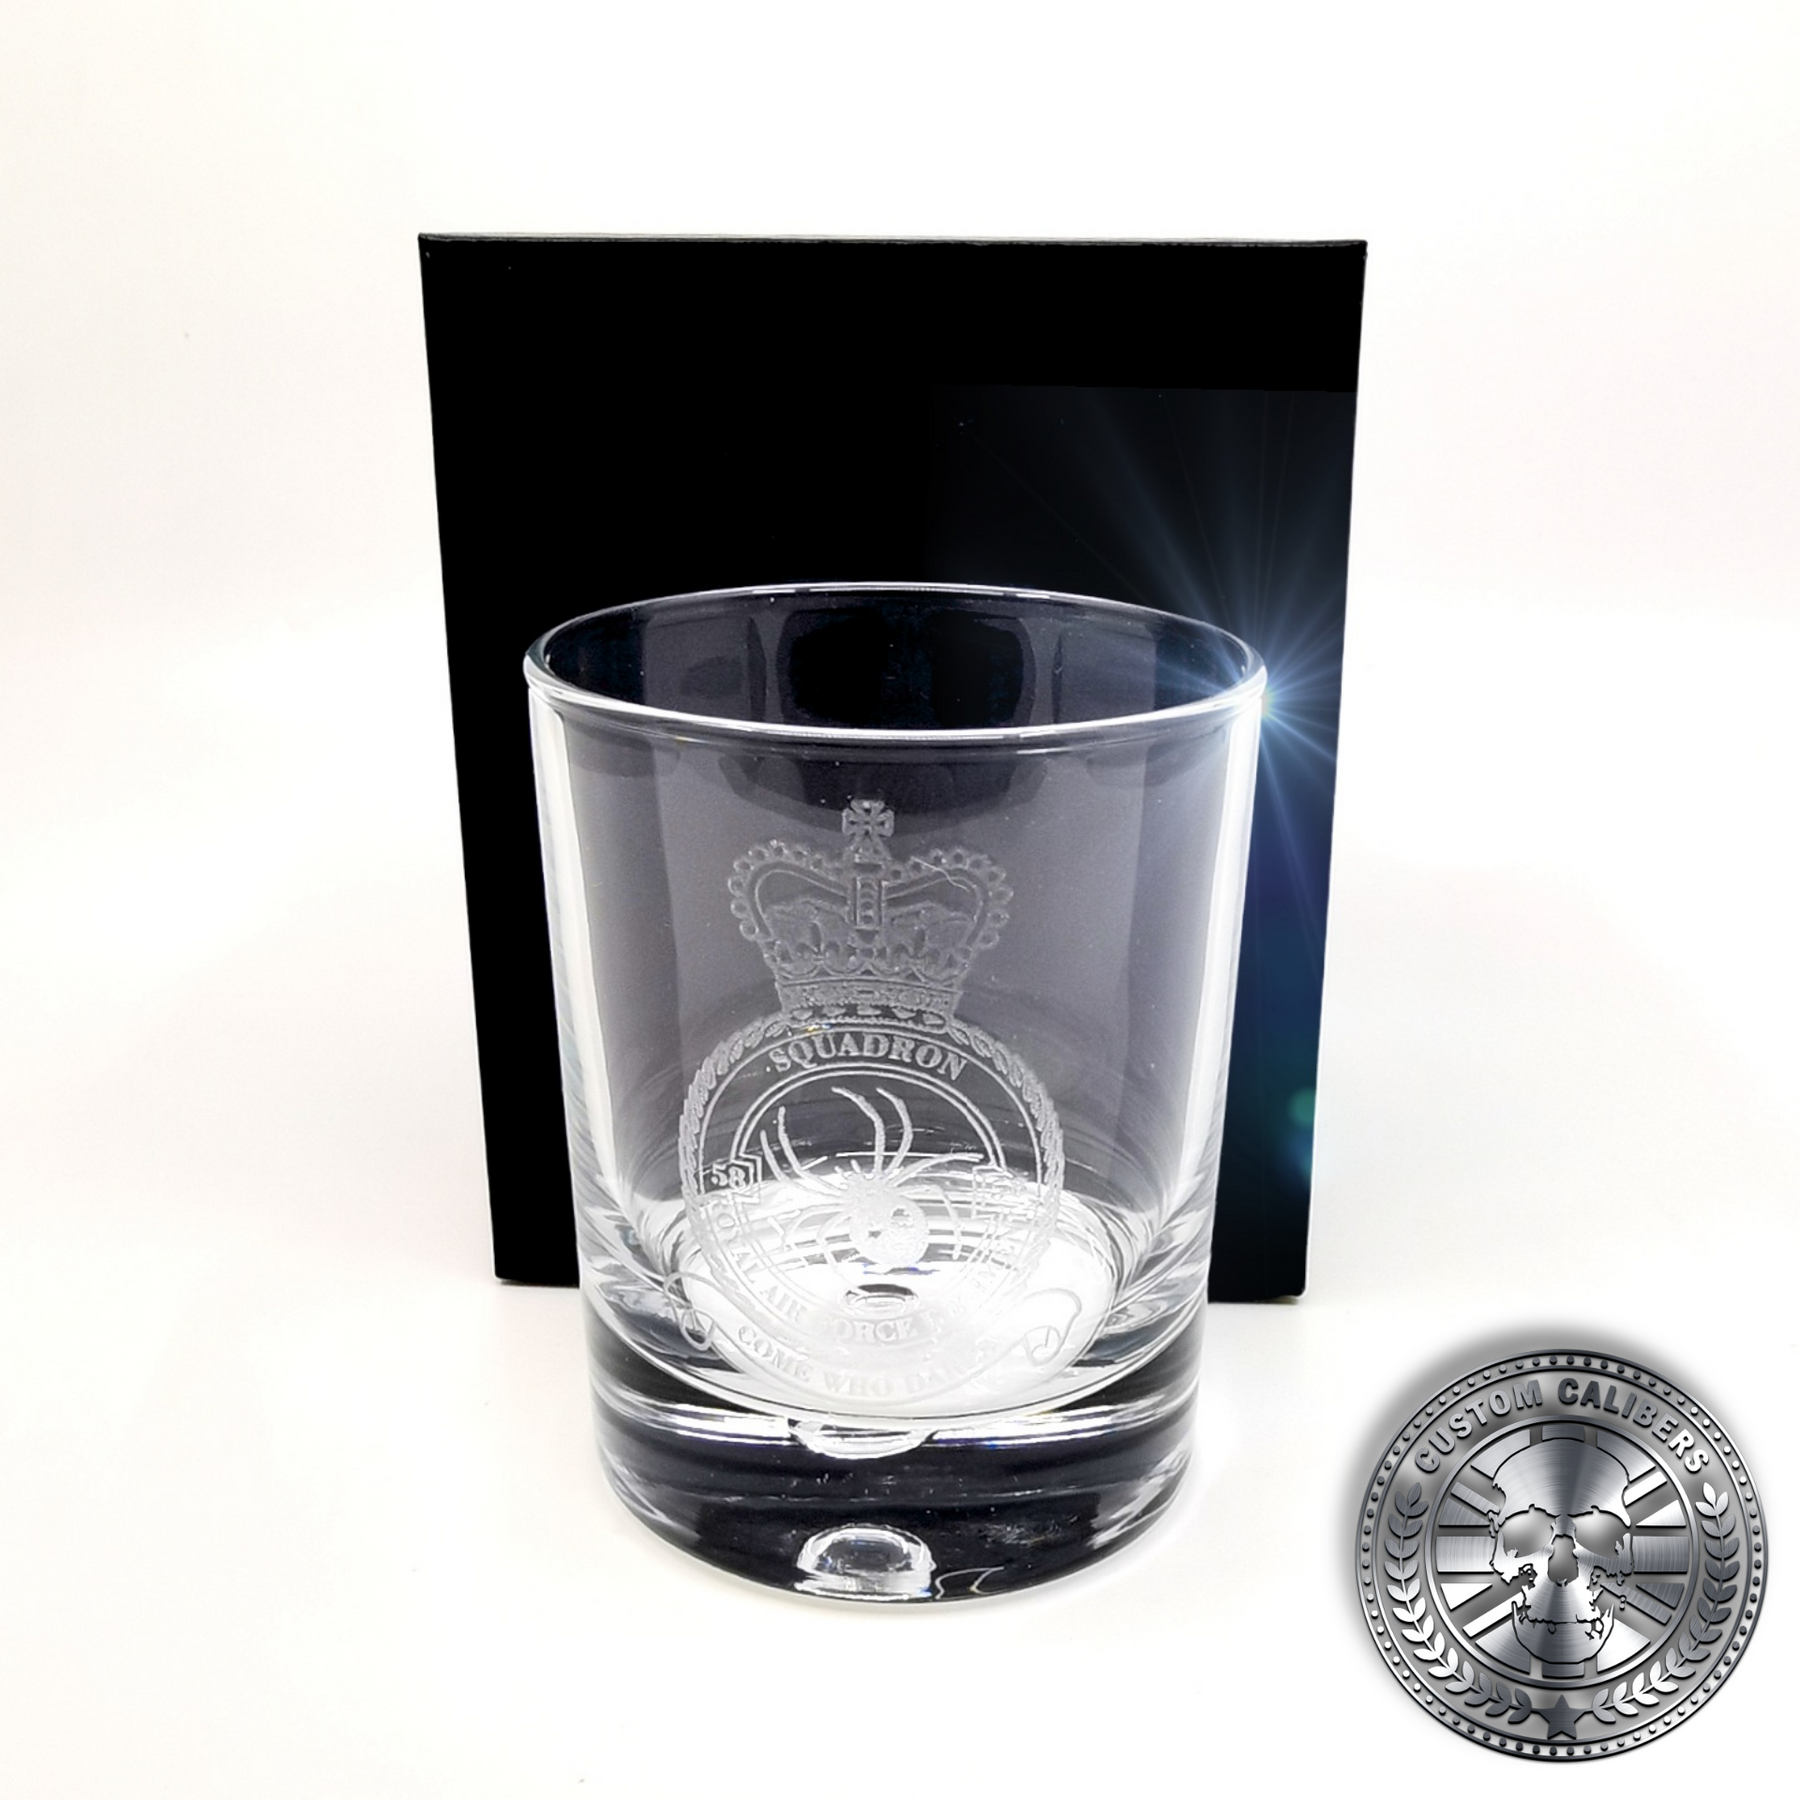 another laser etched whisky tumbler with a silk lined gift box